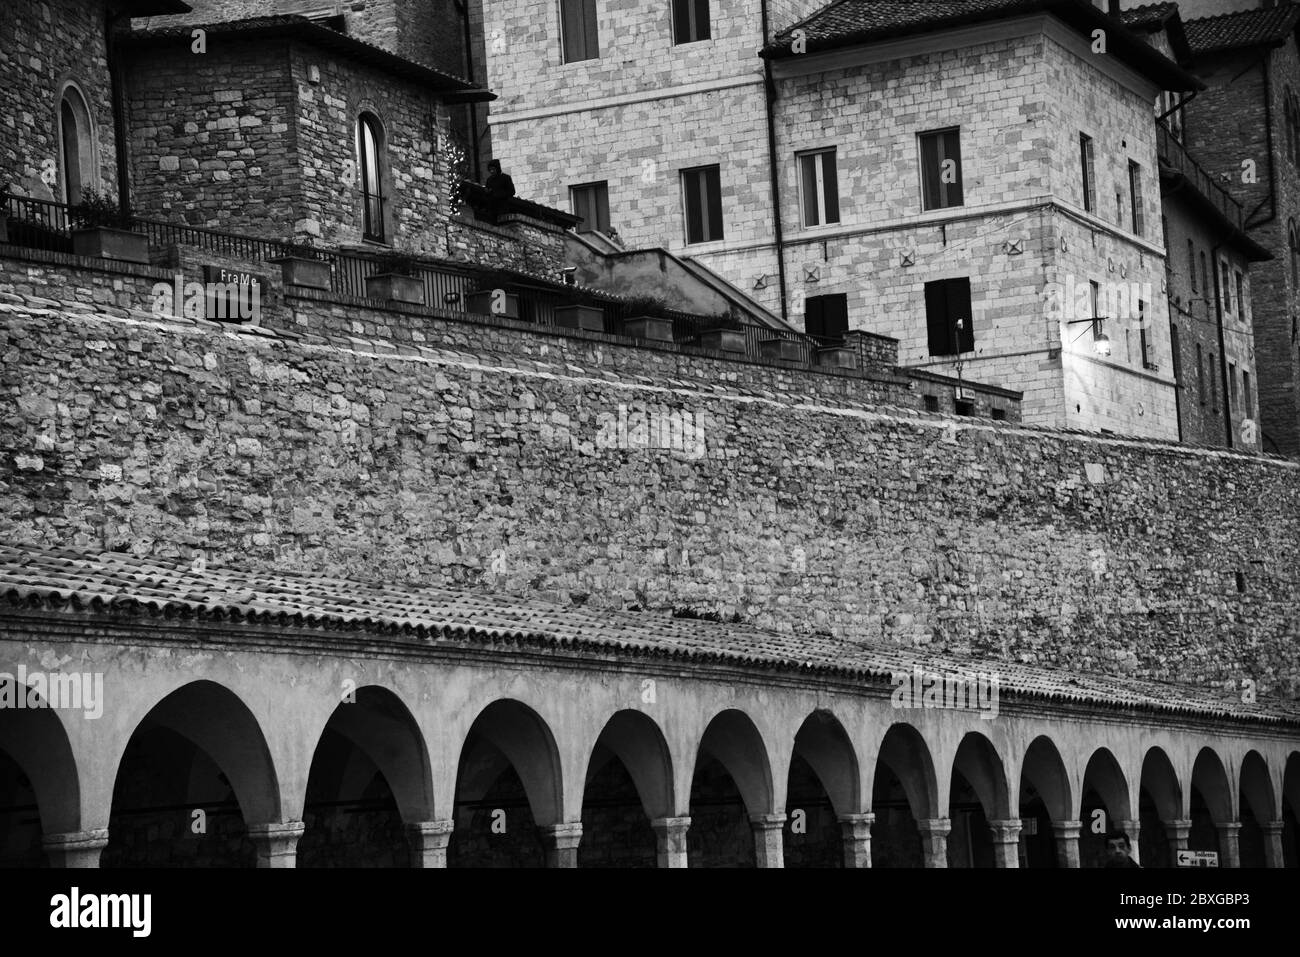 Black and white image of the buildings overlooking Piazza Inferiore di San Francesco, Assisi, Italy Stock Photo